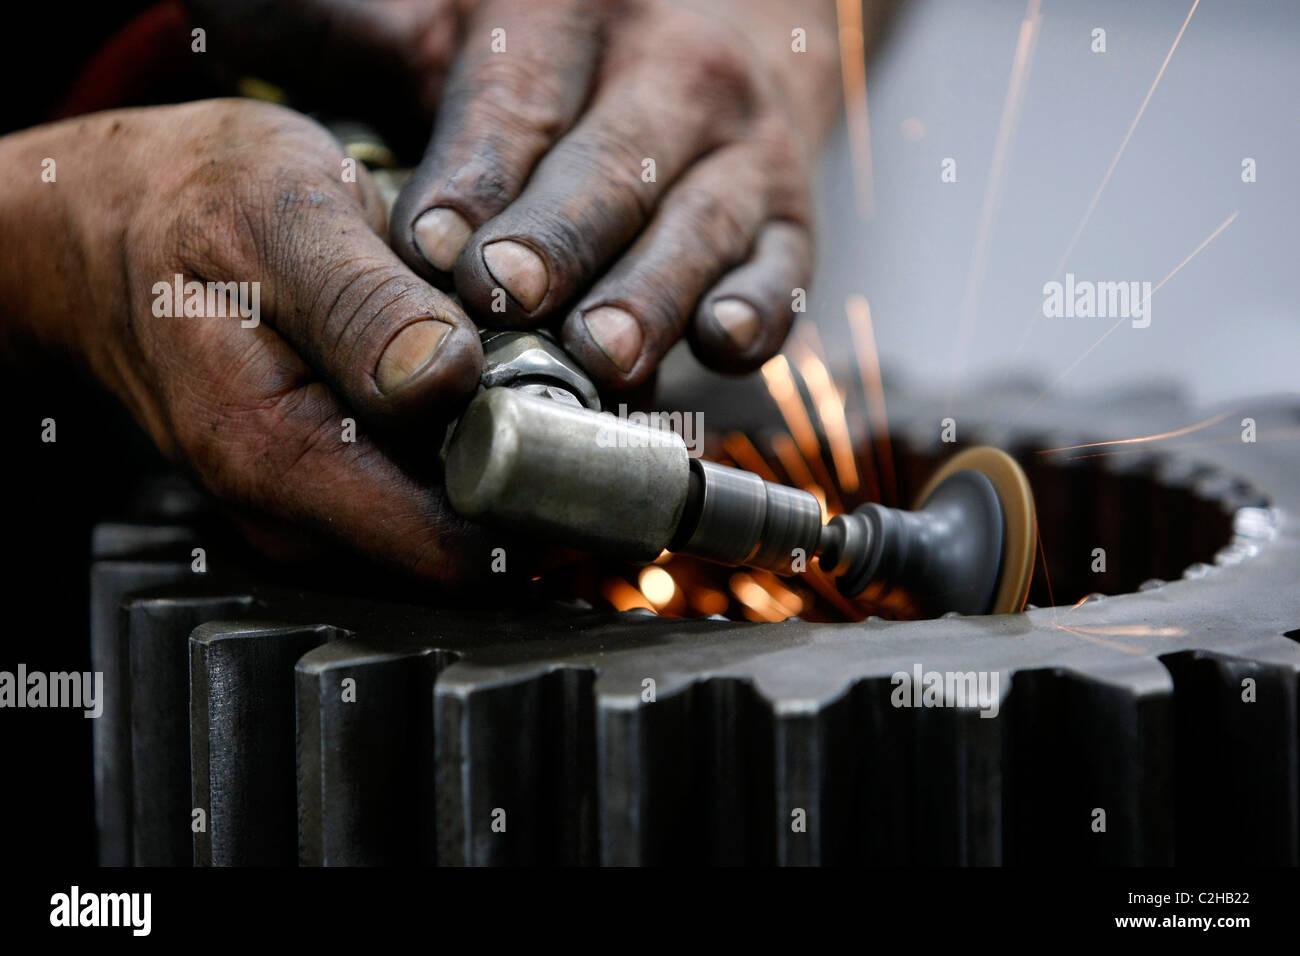 Machinist's dirty hands working with grinding tool with sparks flying. Stock Photo